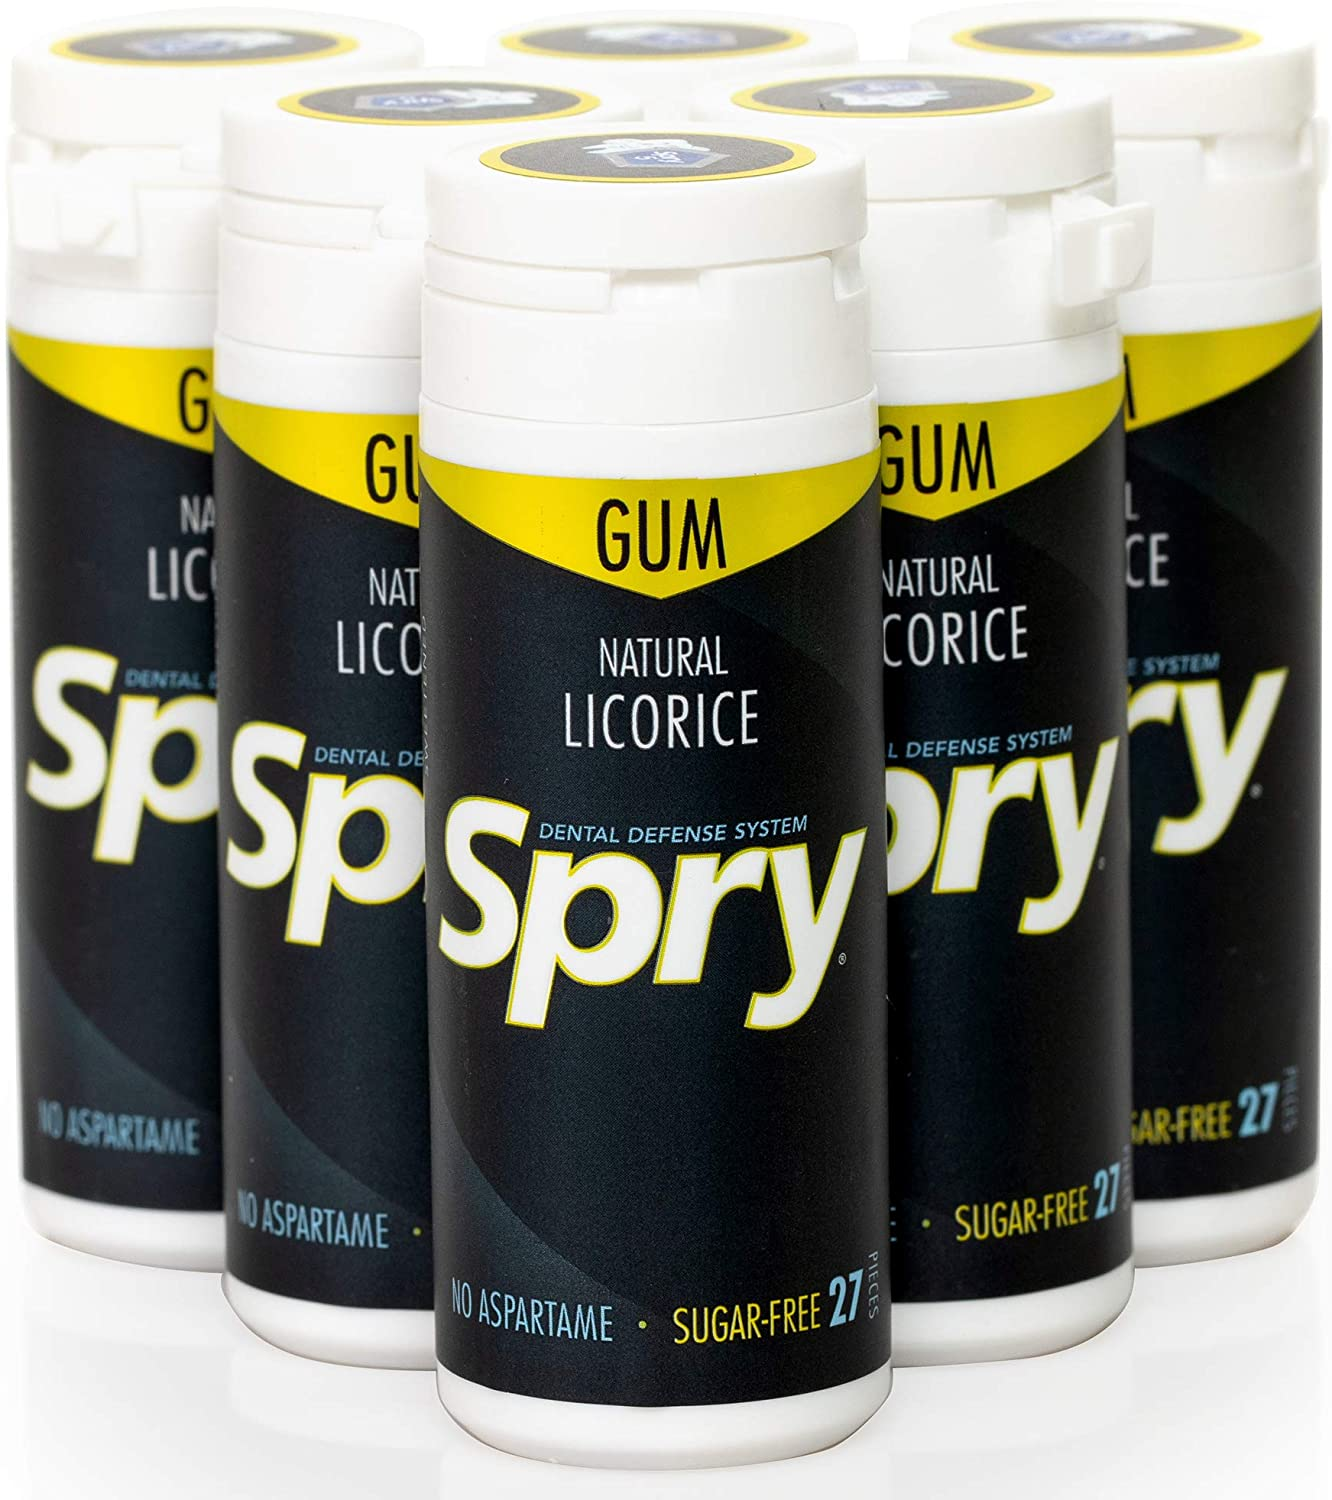 Spry Gum - Fresh Natural Dental Defense System (Spearmint, 100 Count - Pack of 2)